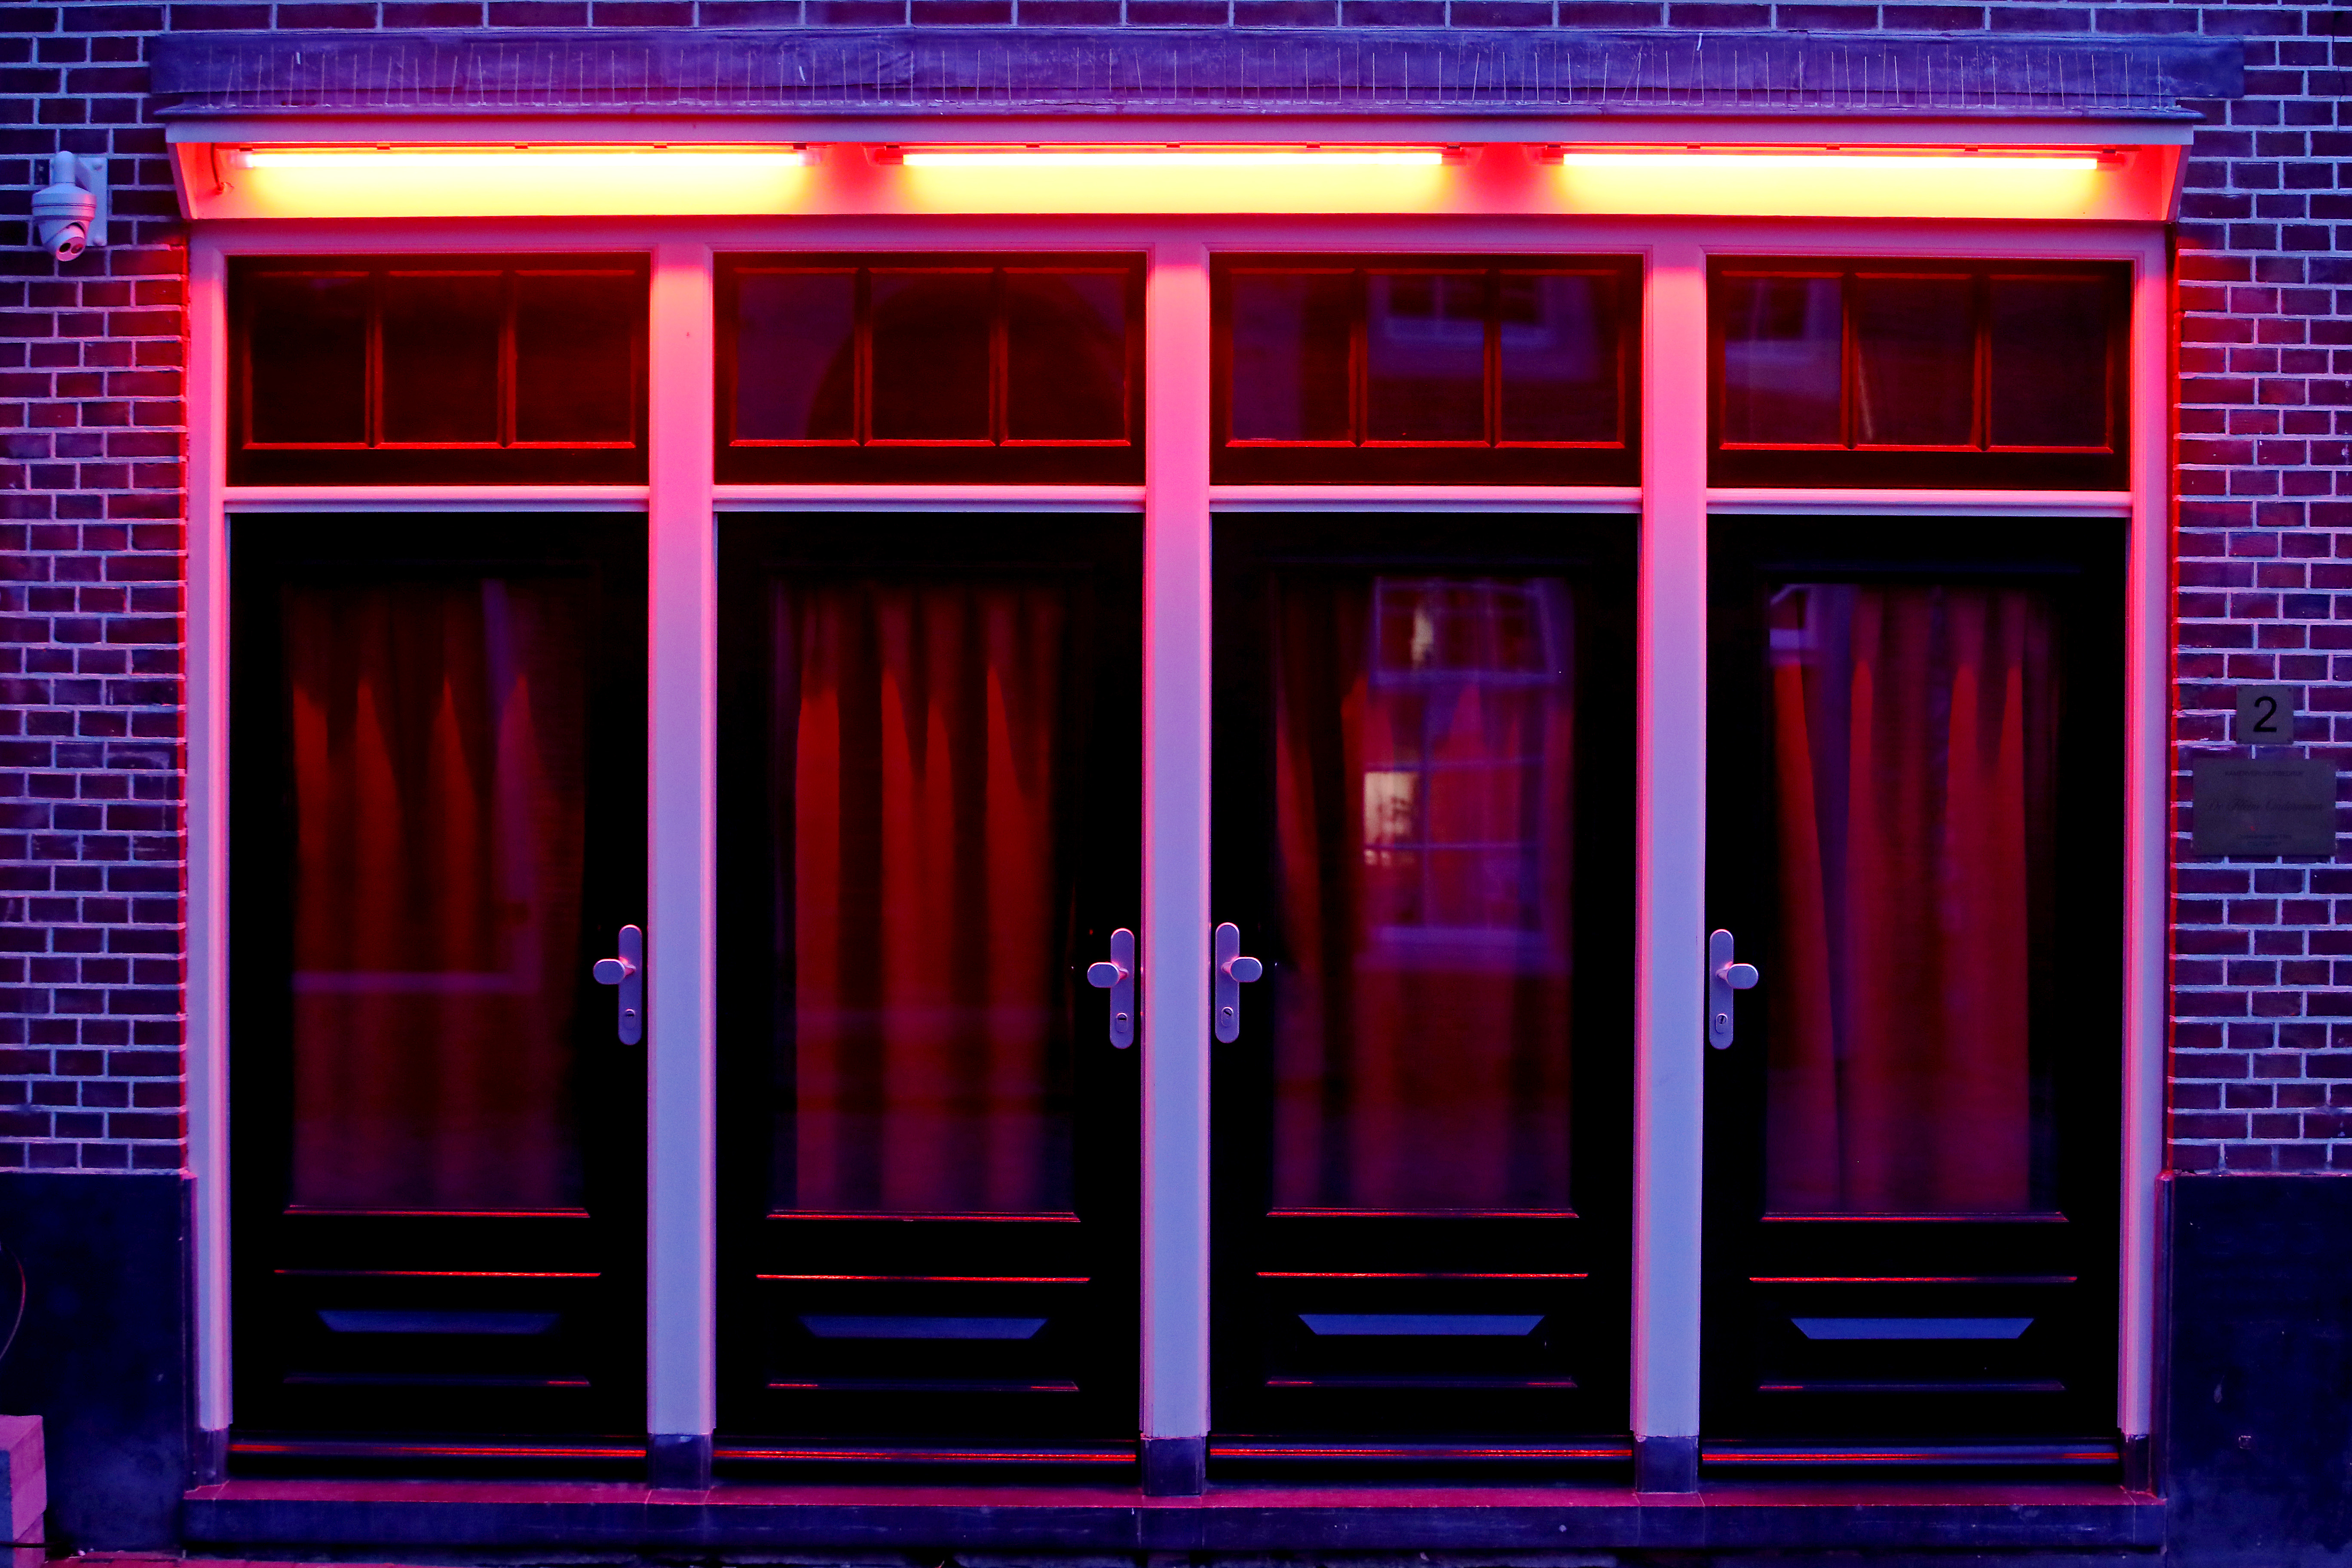 Amsterdam’s Red Light District to Reopen After Coronavirus Lockdown This We...